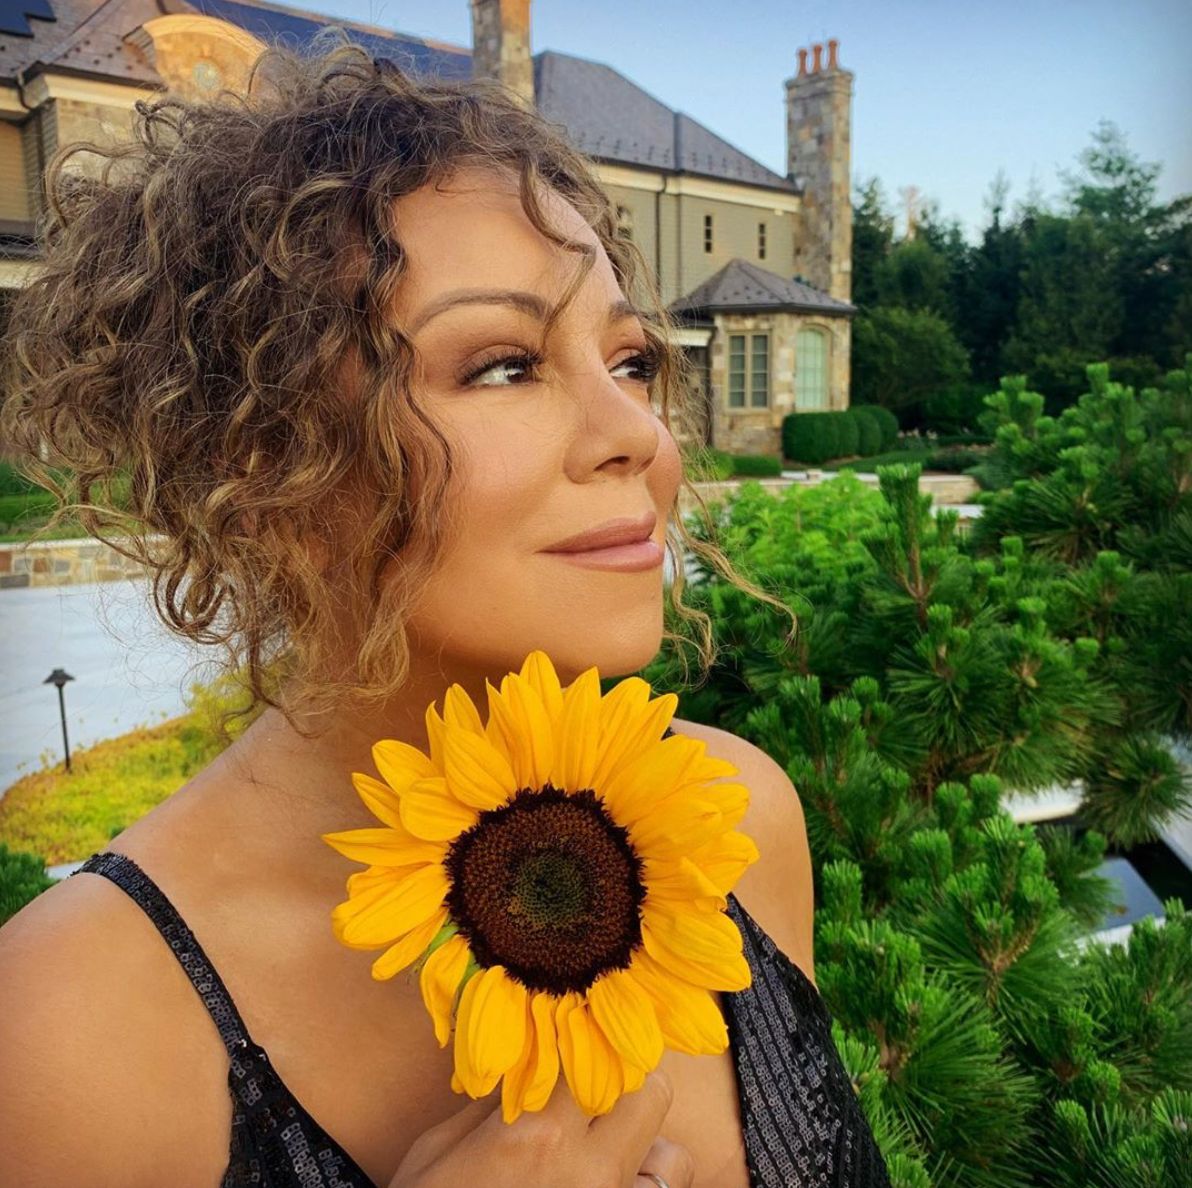 Mariah Carey at her estate holding a sunflower